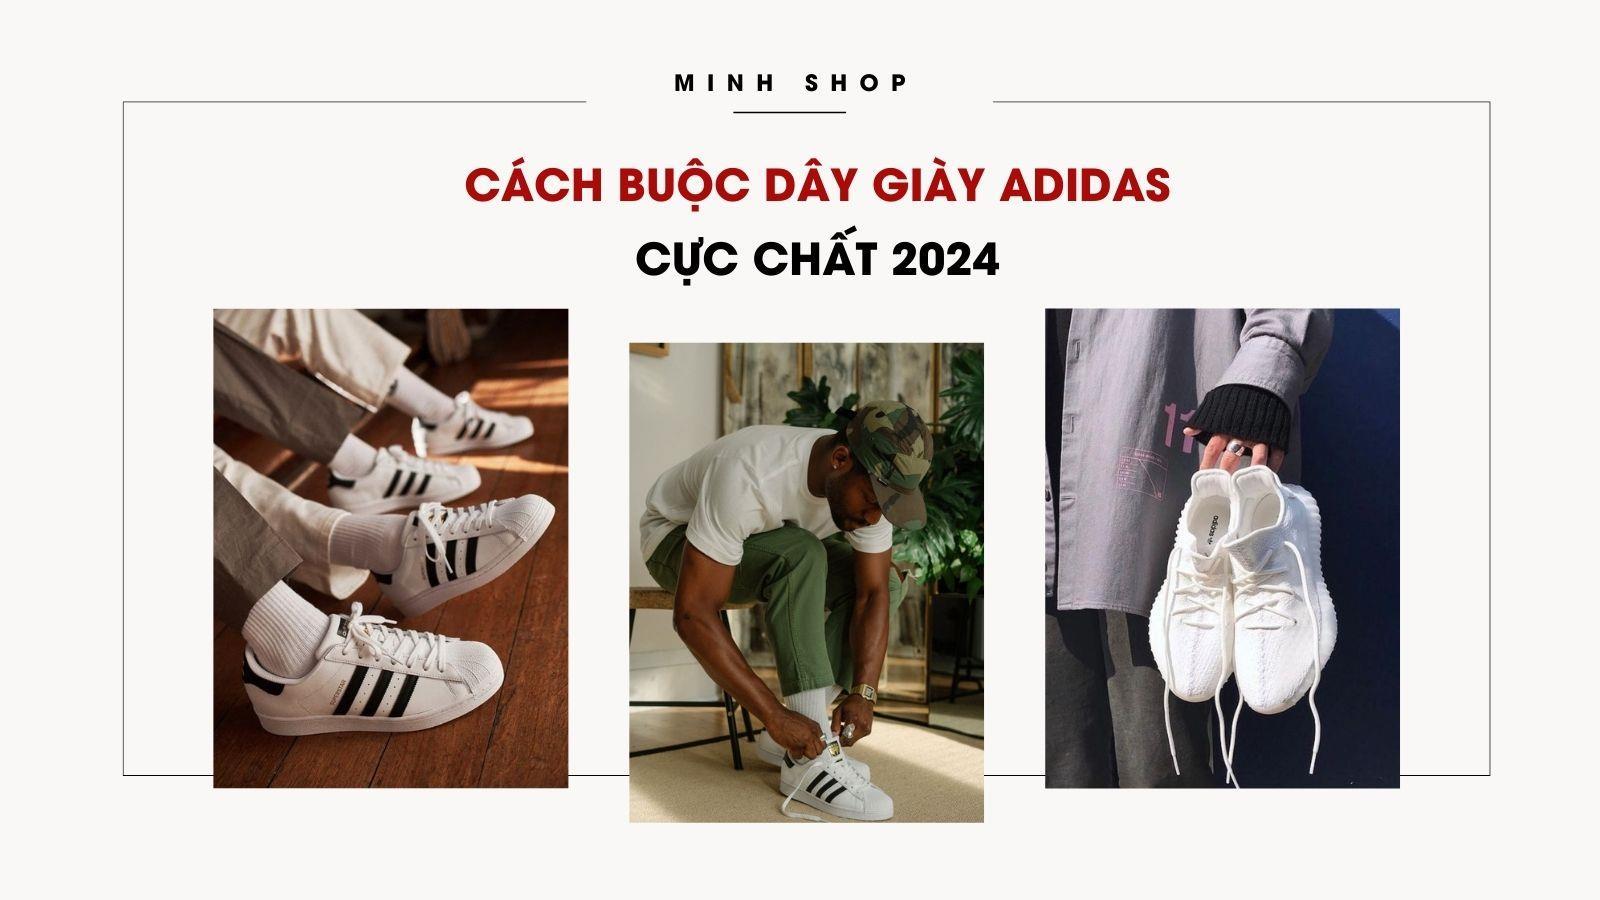 cach-buoc-day-giay-adidas-cuc-chat-2024